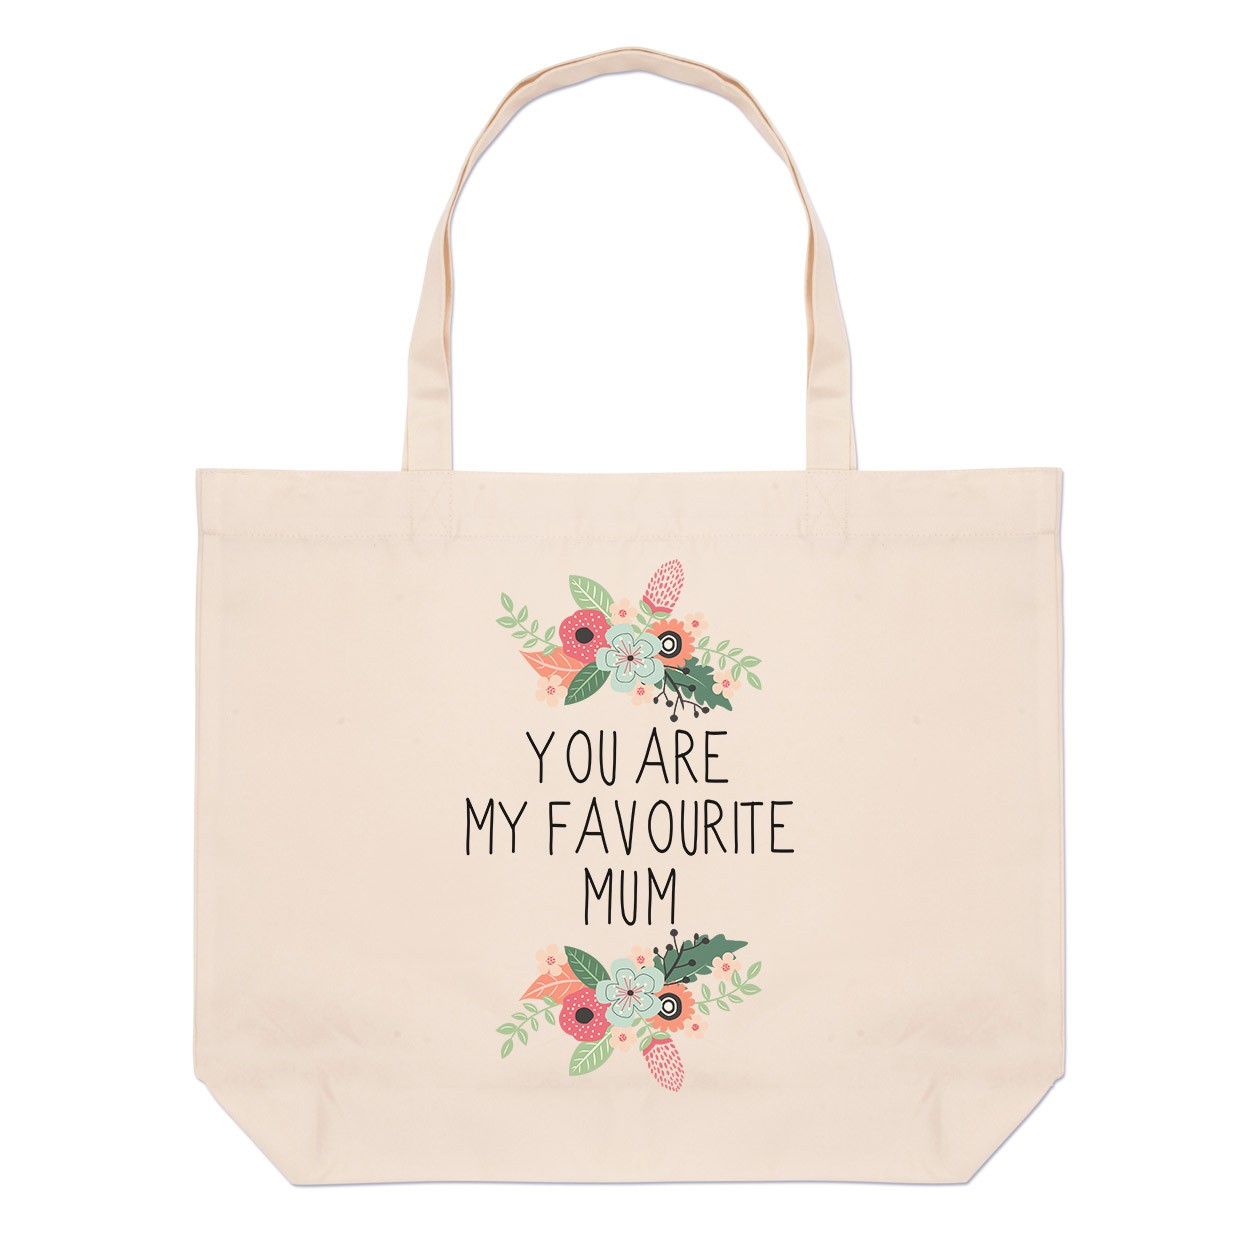 You Are My Favourite Mum Large Beach Tote Bag